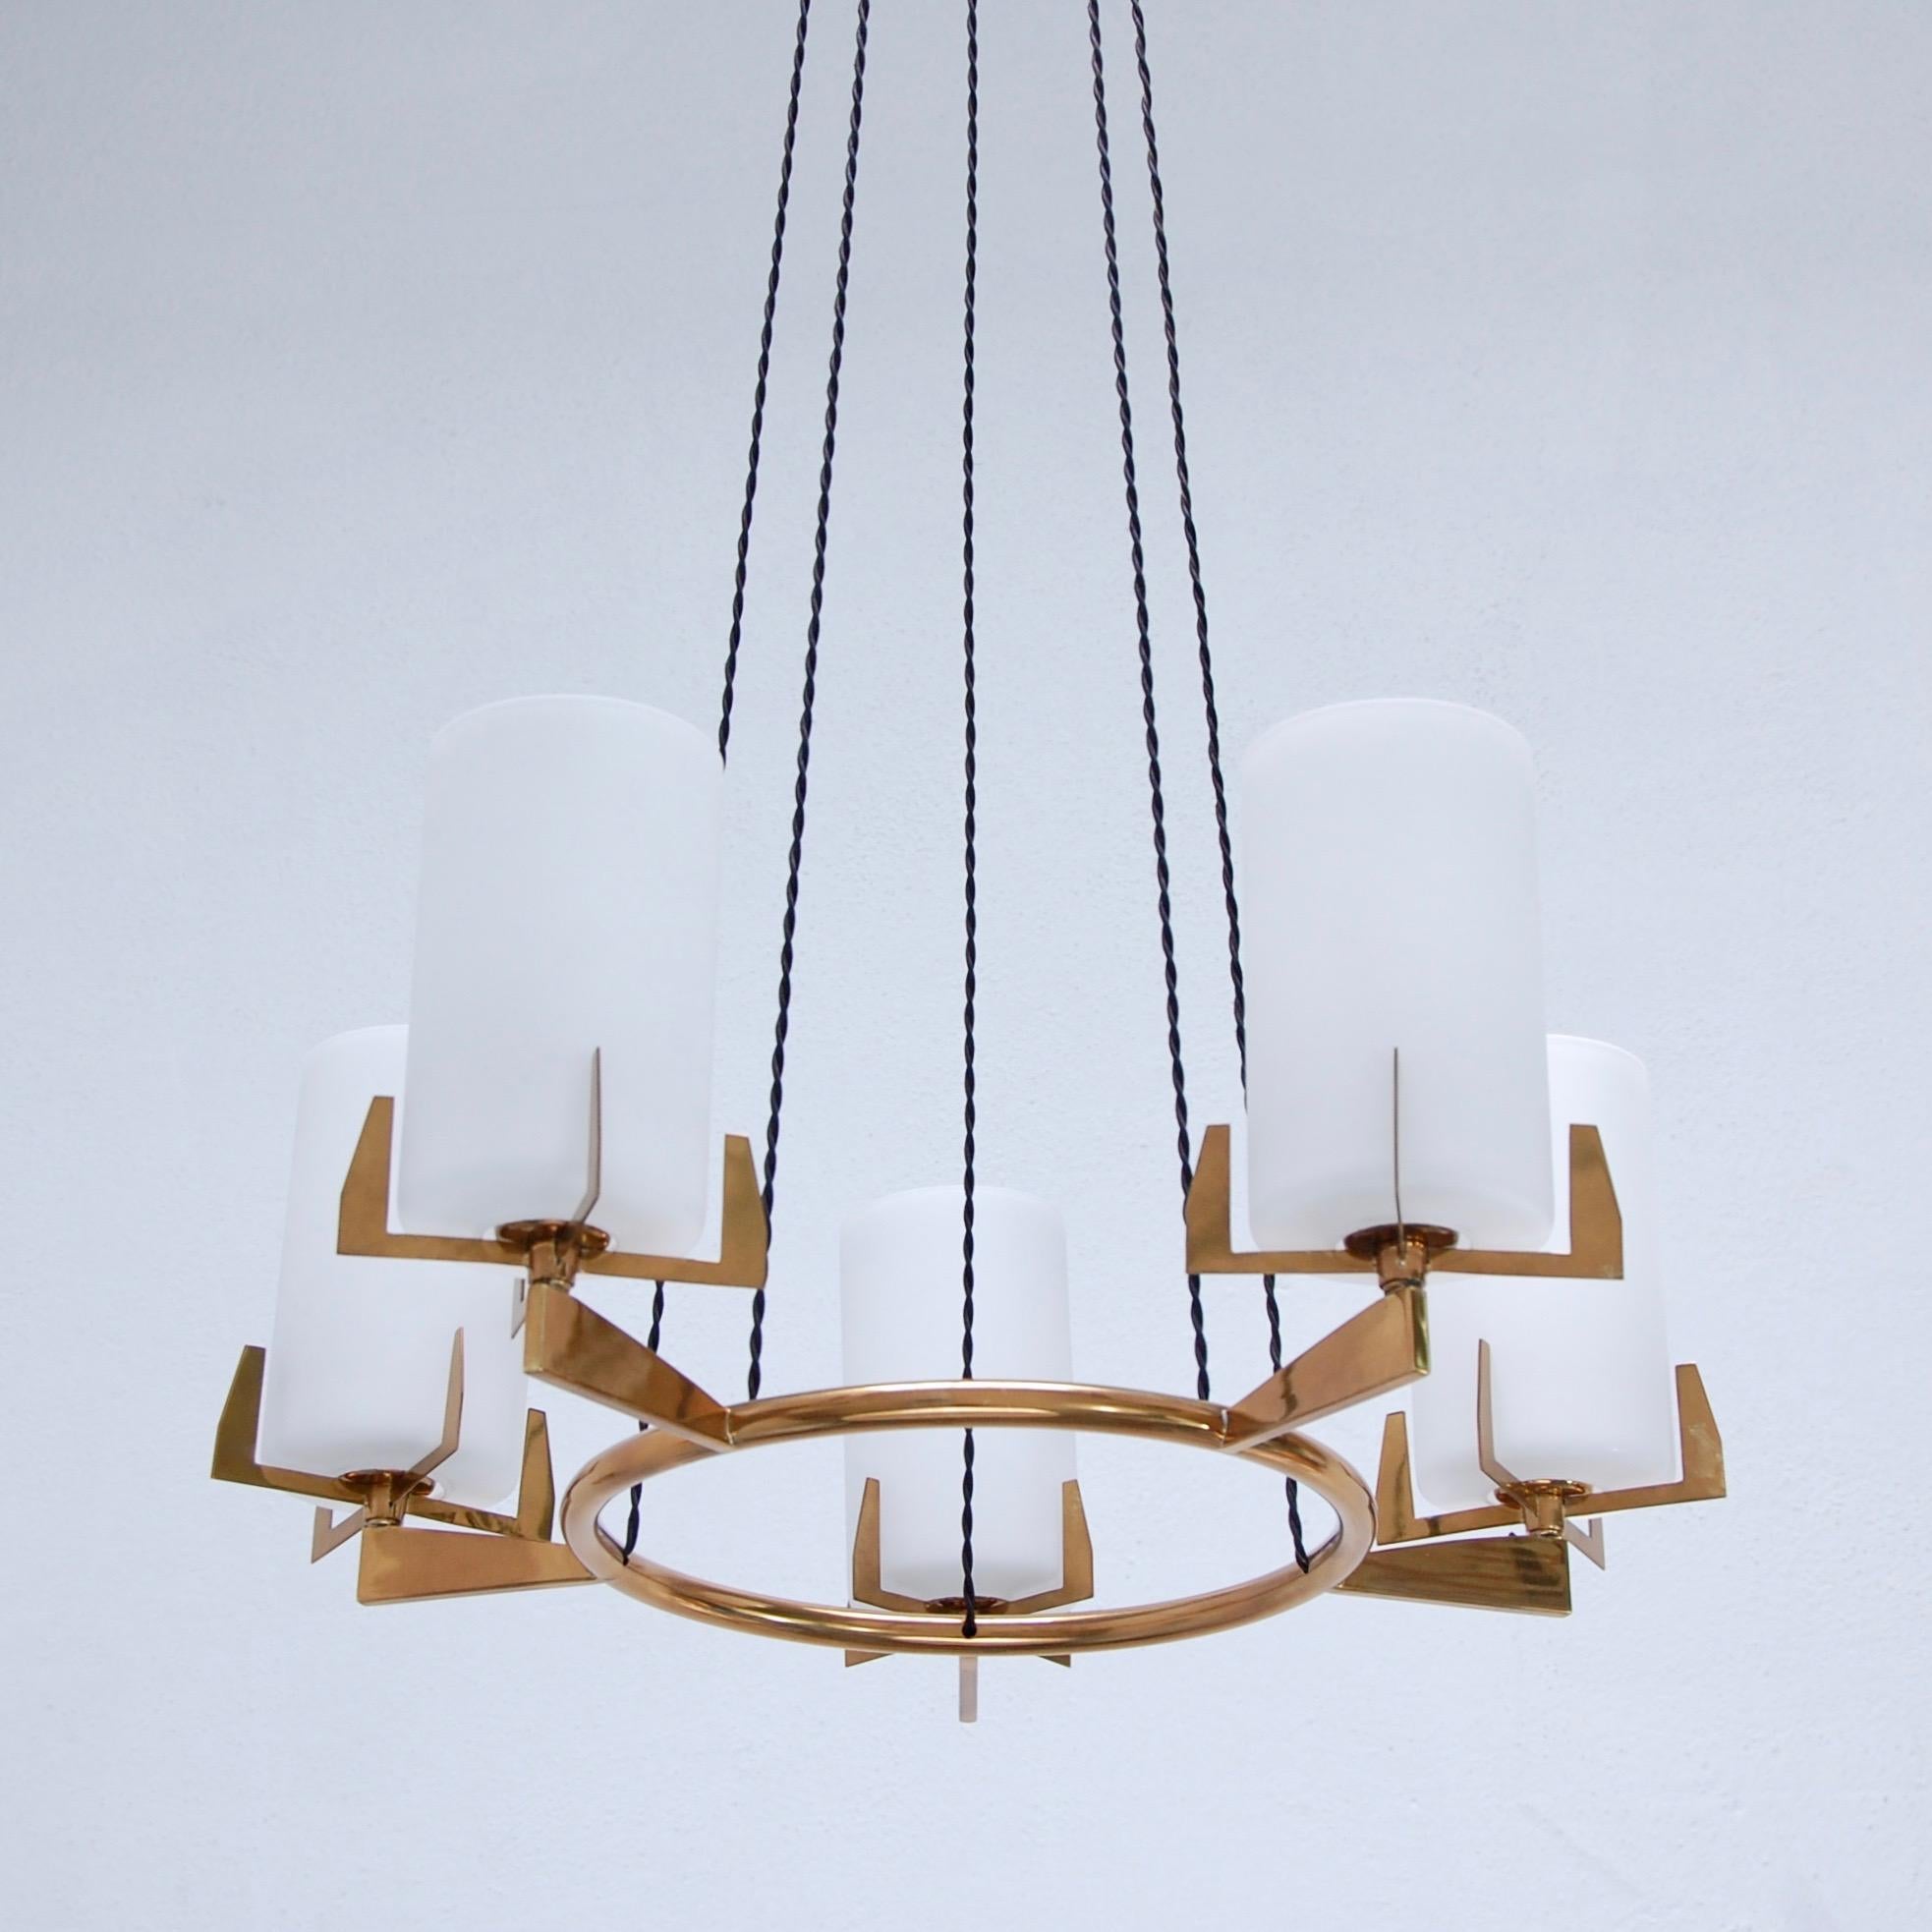 Mid-Century Modern five-light circular chandelier. Five-cylinder glass shades, patinated brass and aluminum details. Fully restored and wired for use in the US. Single E26 medium based light sockets per glass cylinder shade. Light bulbs included